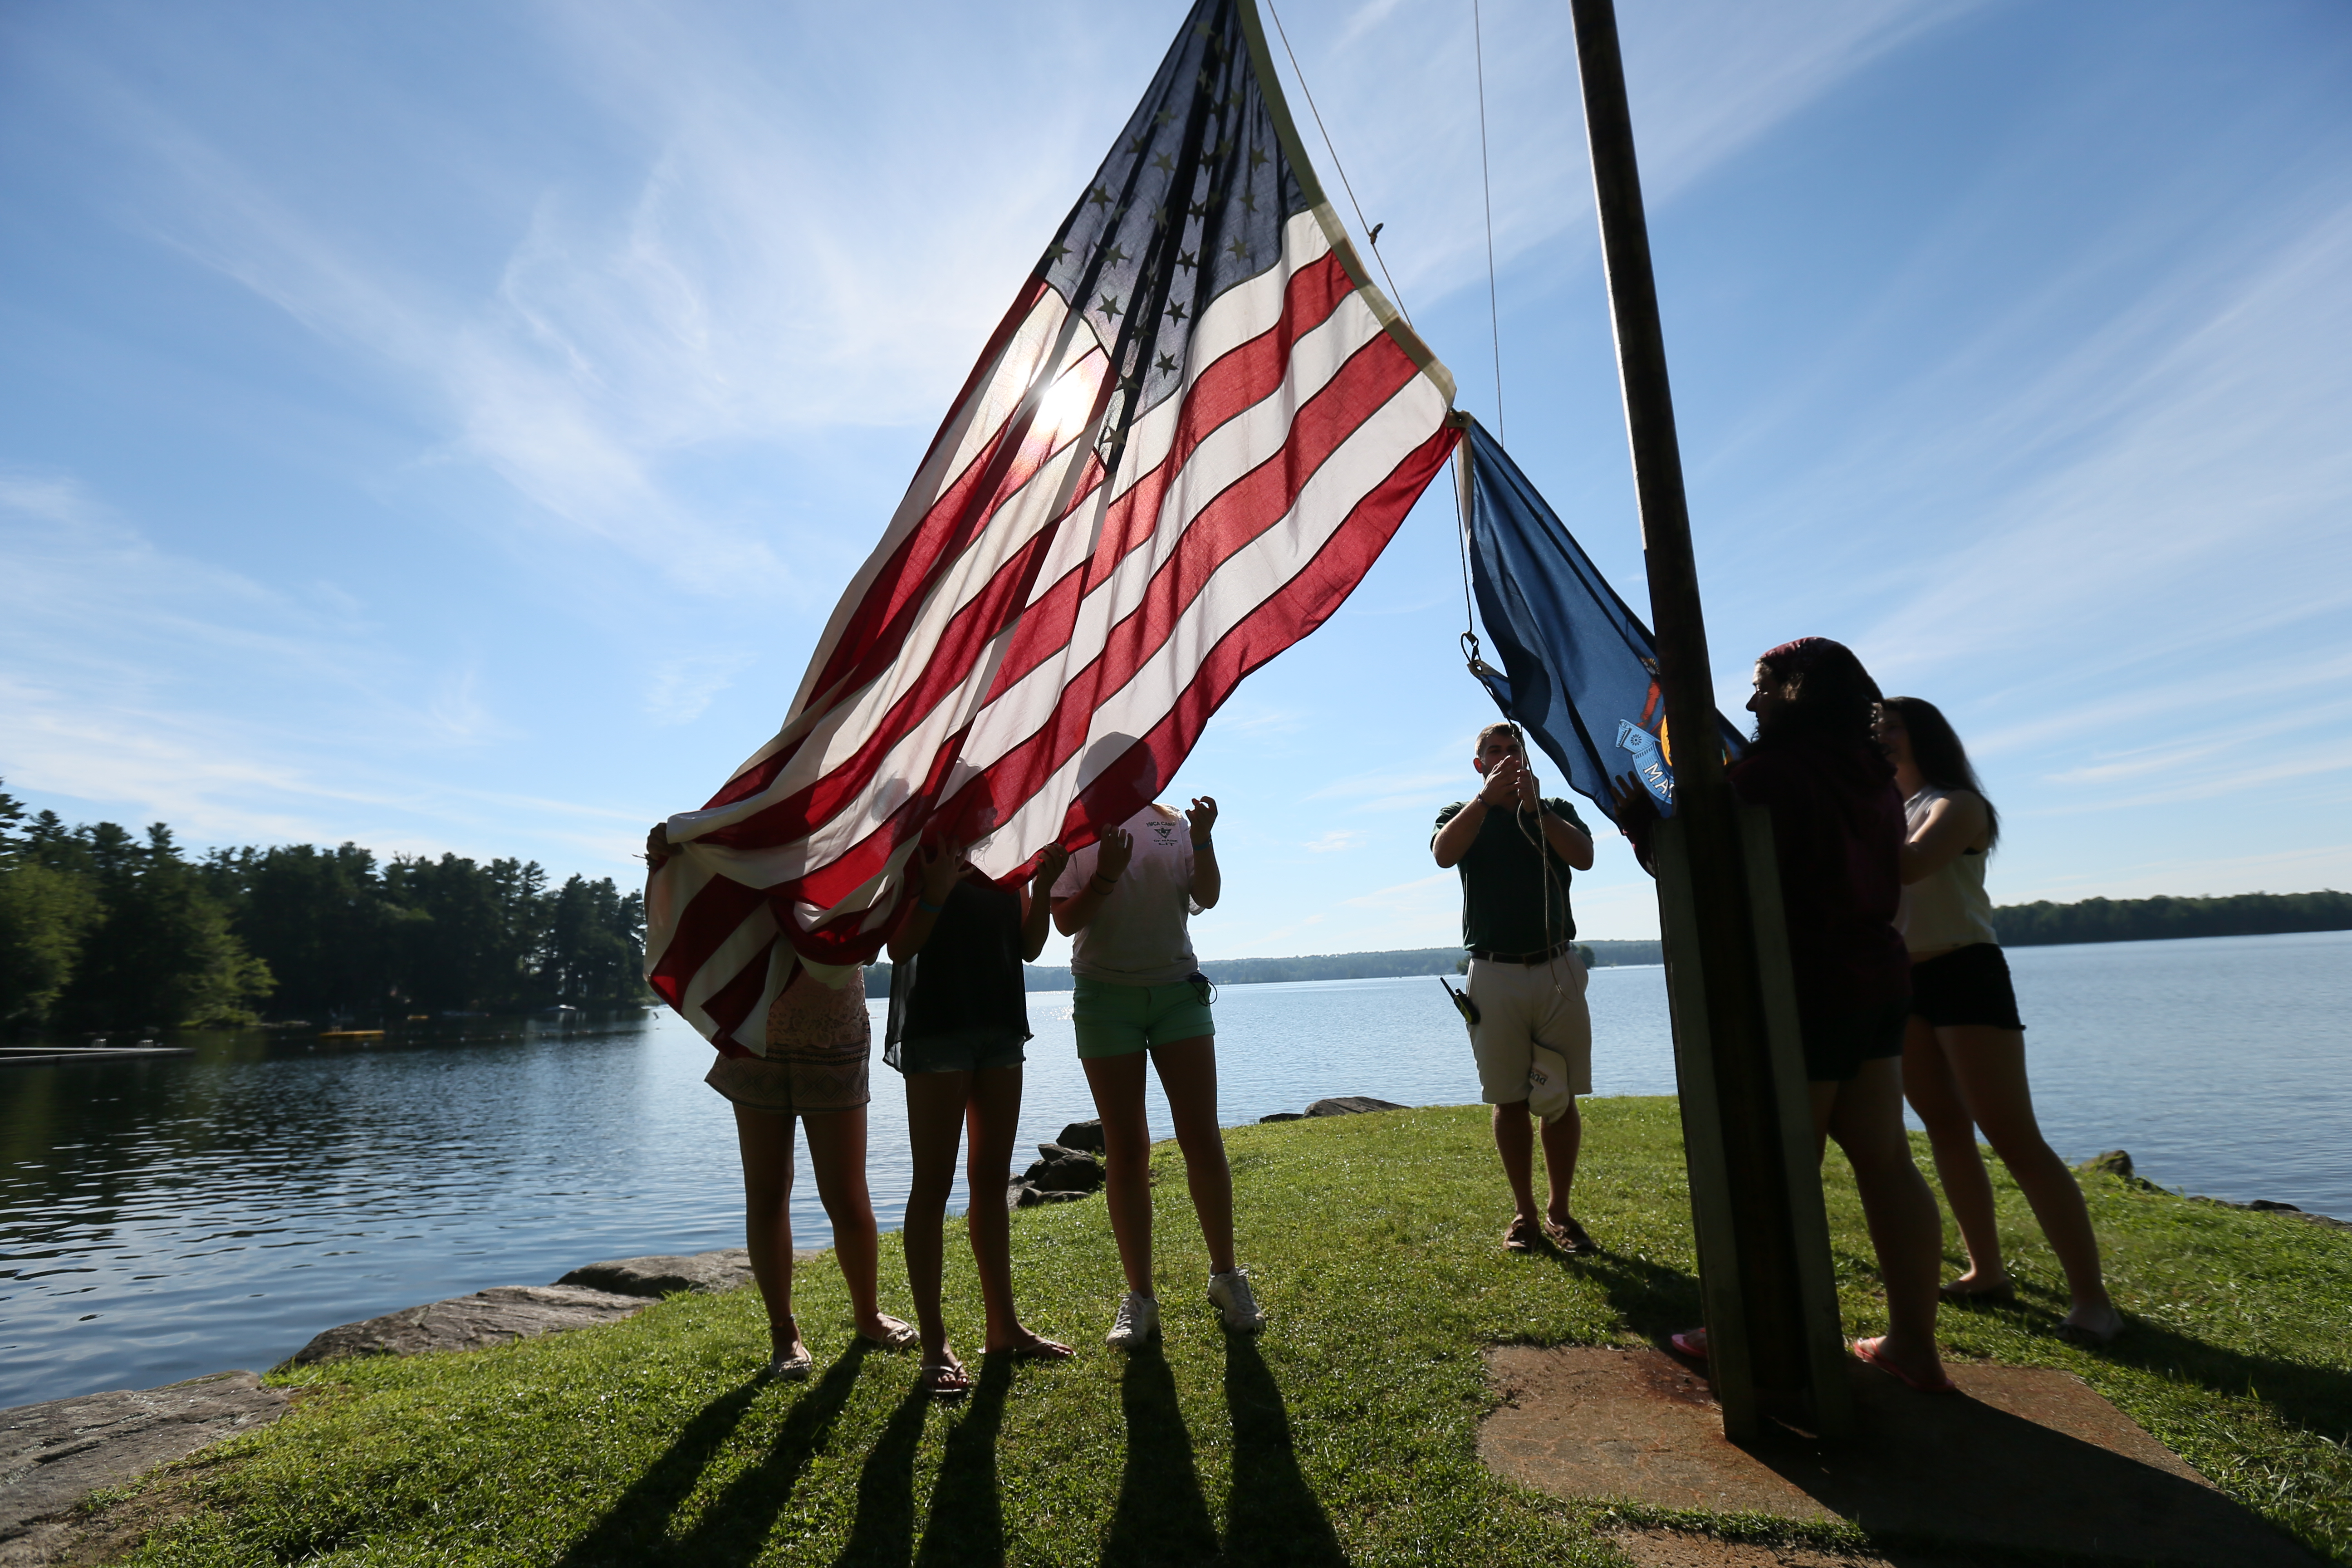  YMCA of Maine summer campers  raise the flag to begin the day in Winthrop, ME.